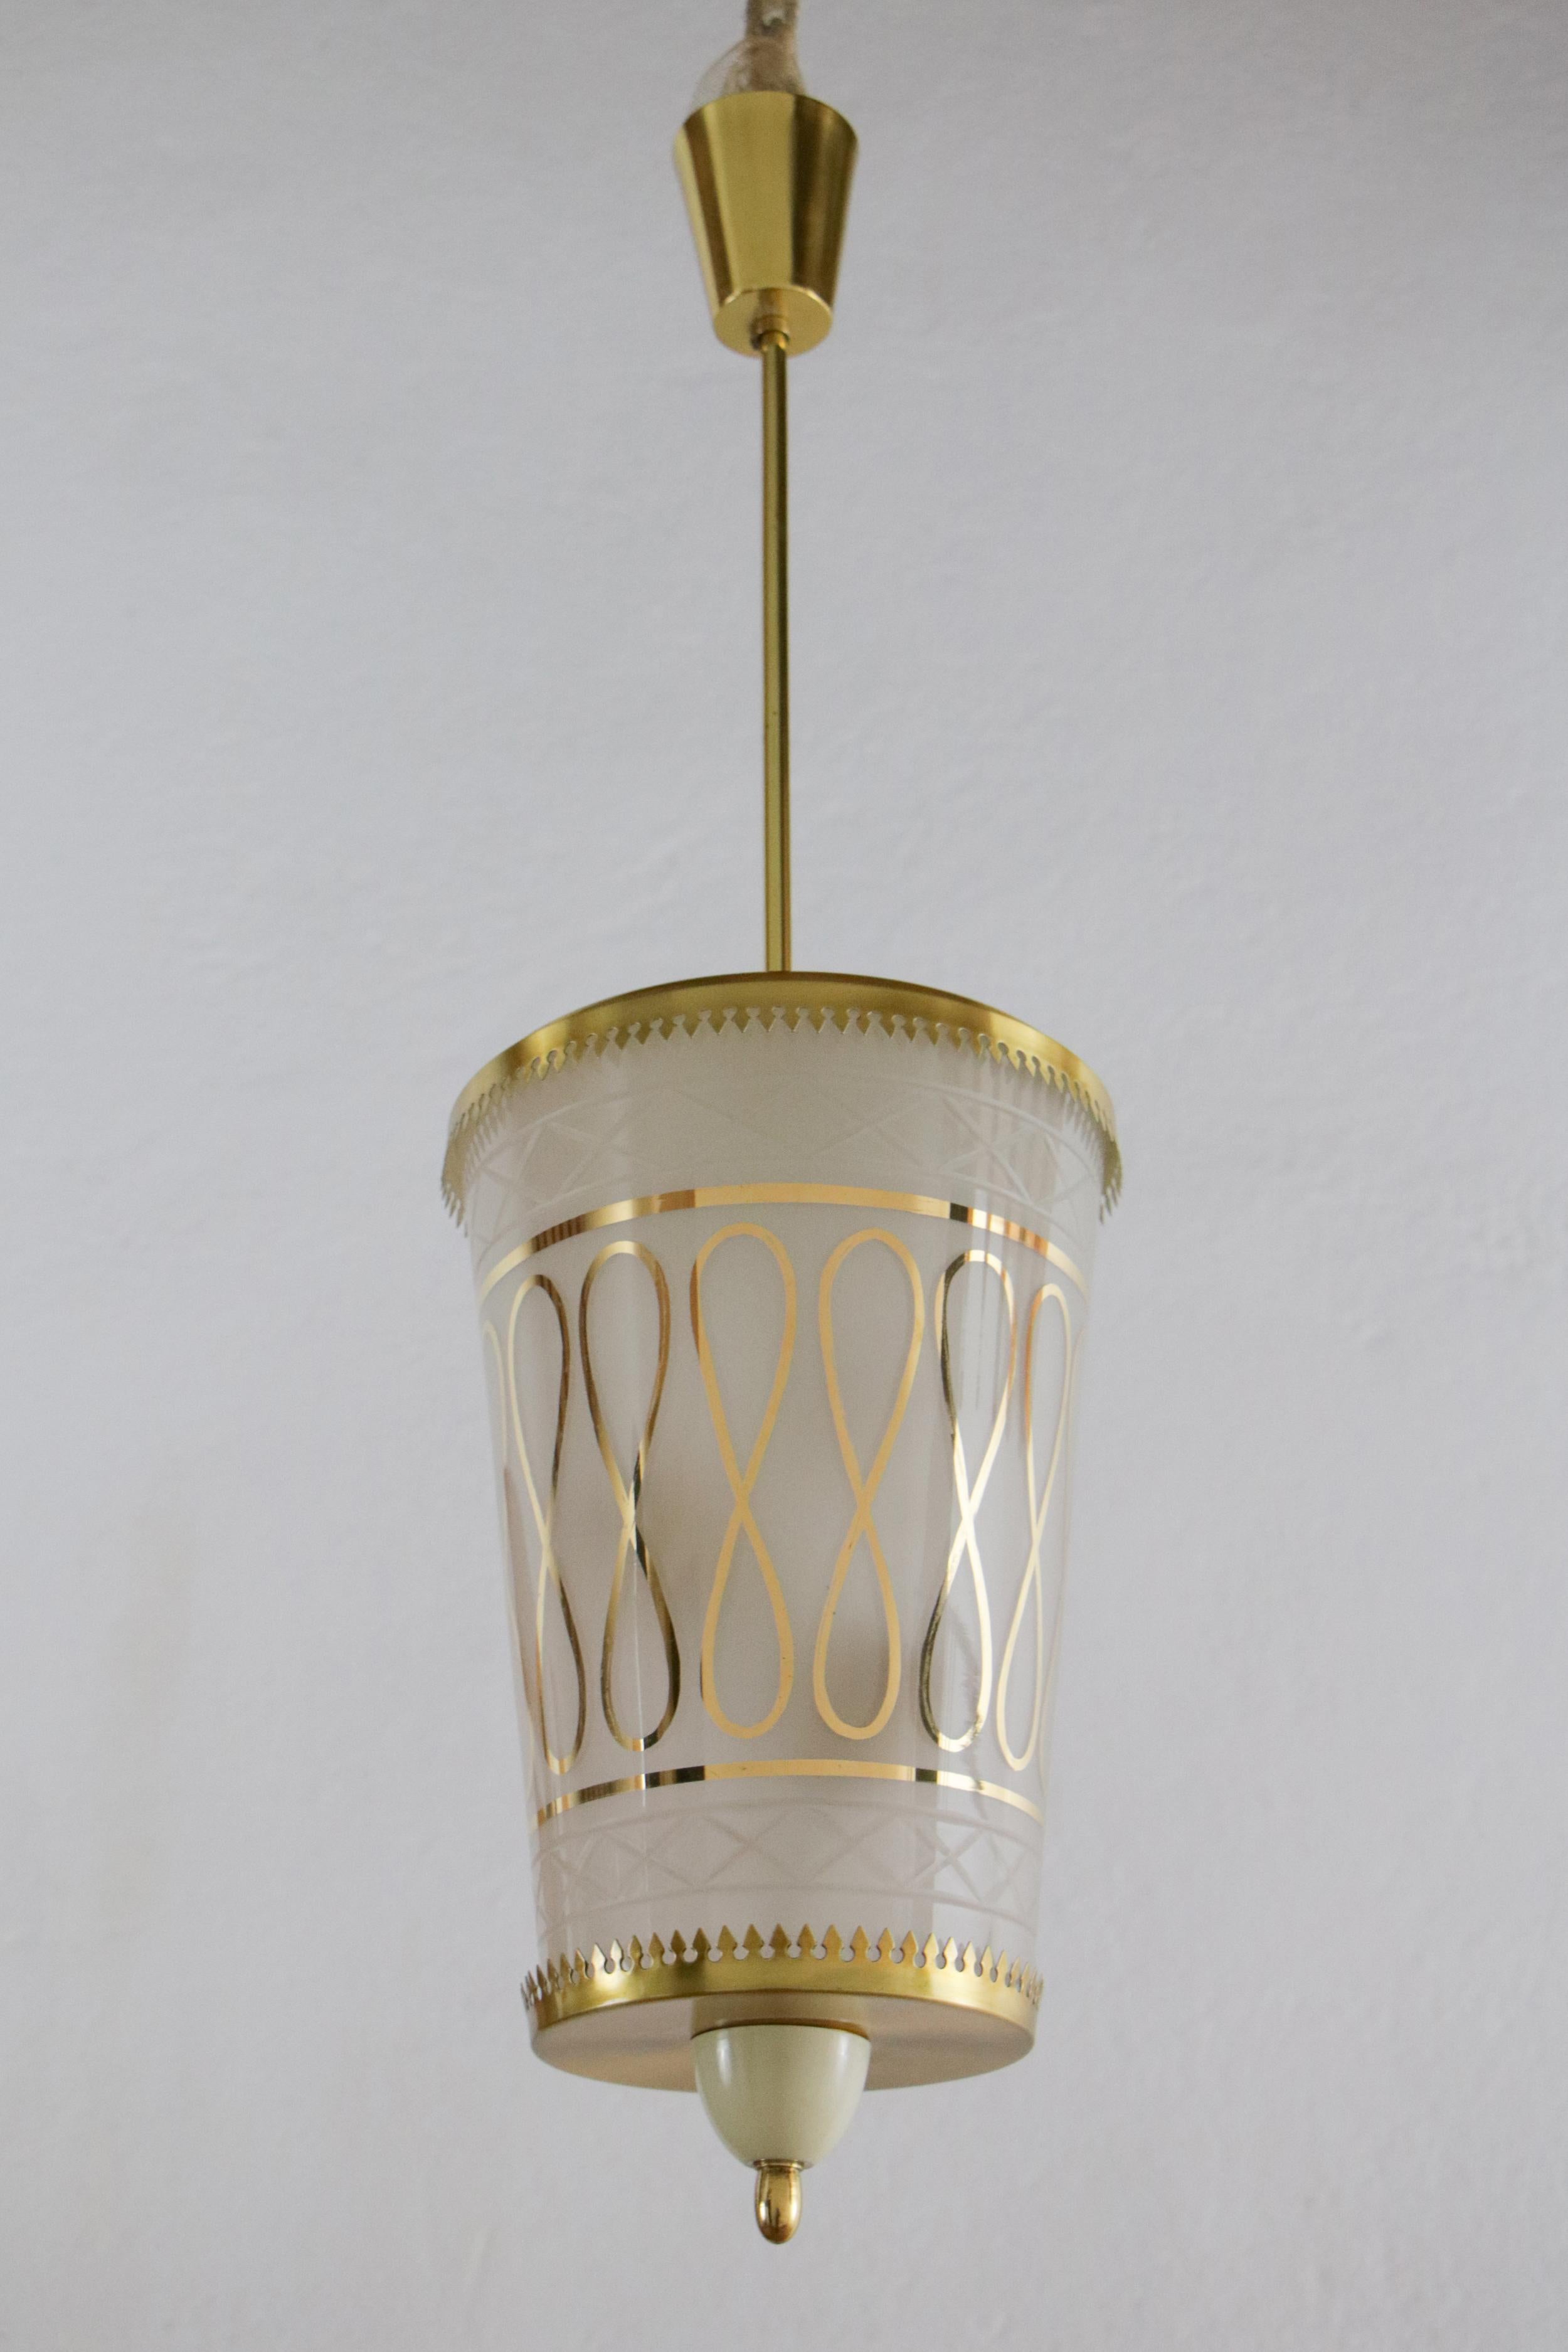 A magnificent mid-century pendant lamp from Italy, with brass, etched and decorated glass, and three E14 bulbs. This is an incredibly elegant and refined design, and the brass and glass parts offer excellent executive quality. It has been subjected